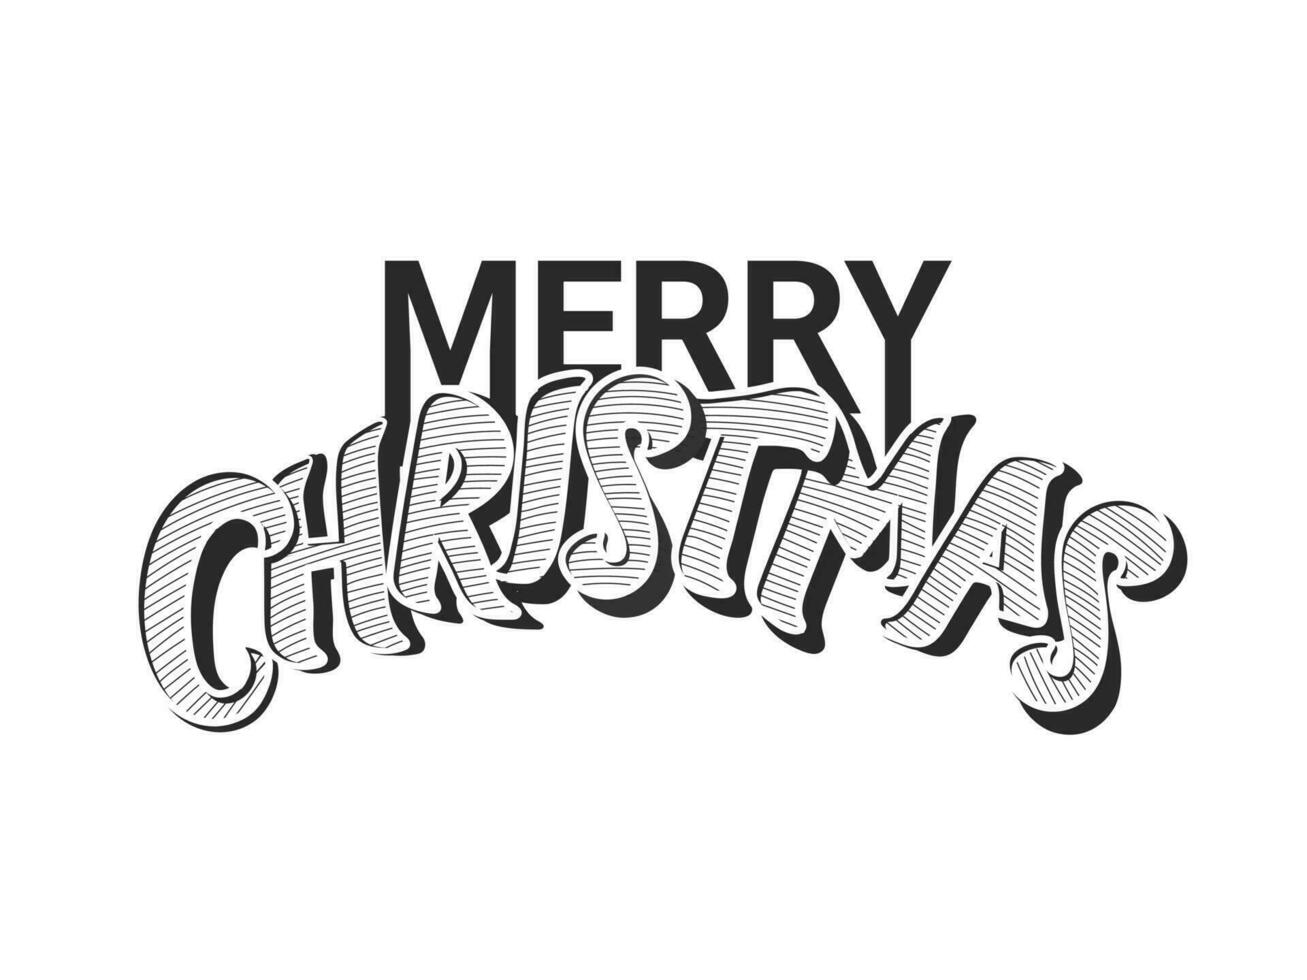 Merry Christmas Text in Strip Pattern on White Background. vector